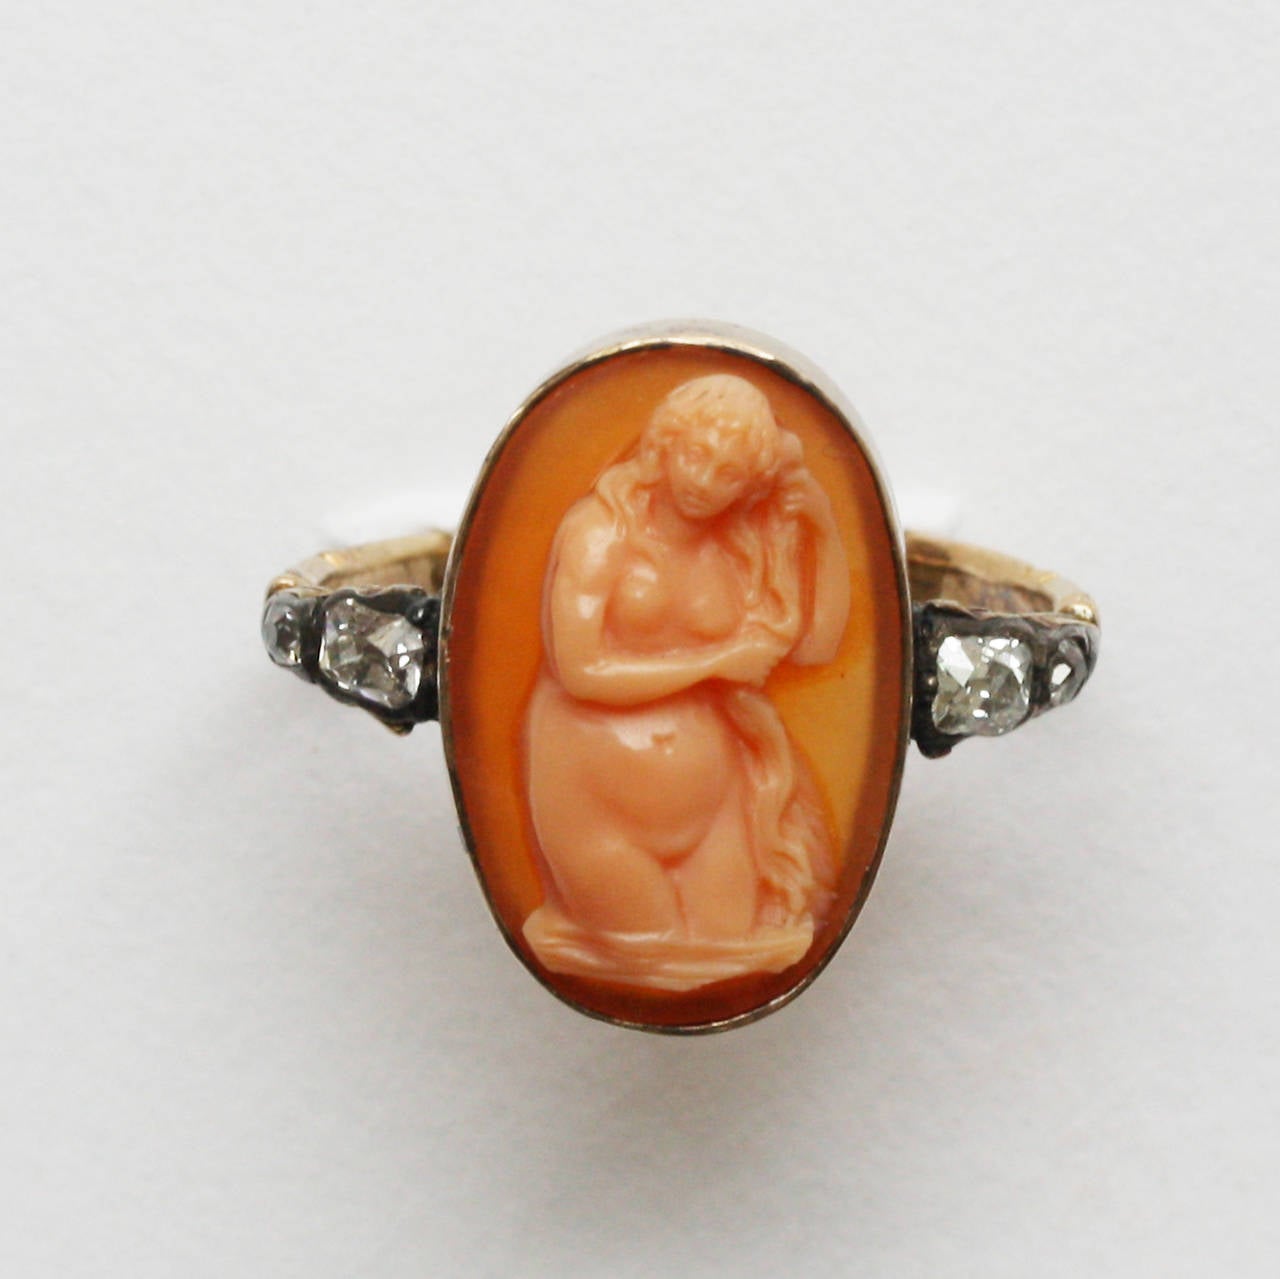 A gold ring set with an agate cameo representing the birth of Venus or Venus Anadyomene depicting Venus the goddess of love rising from the sea wringing her hair (after the painting by Titian 'Venus rising from the sea' from the National Gallery of